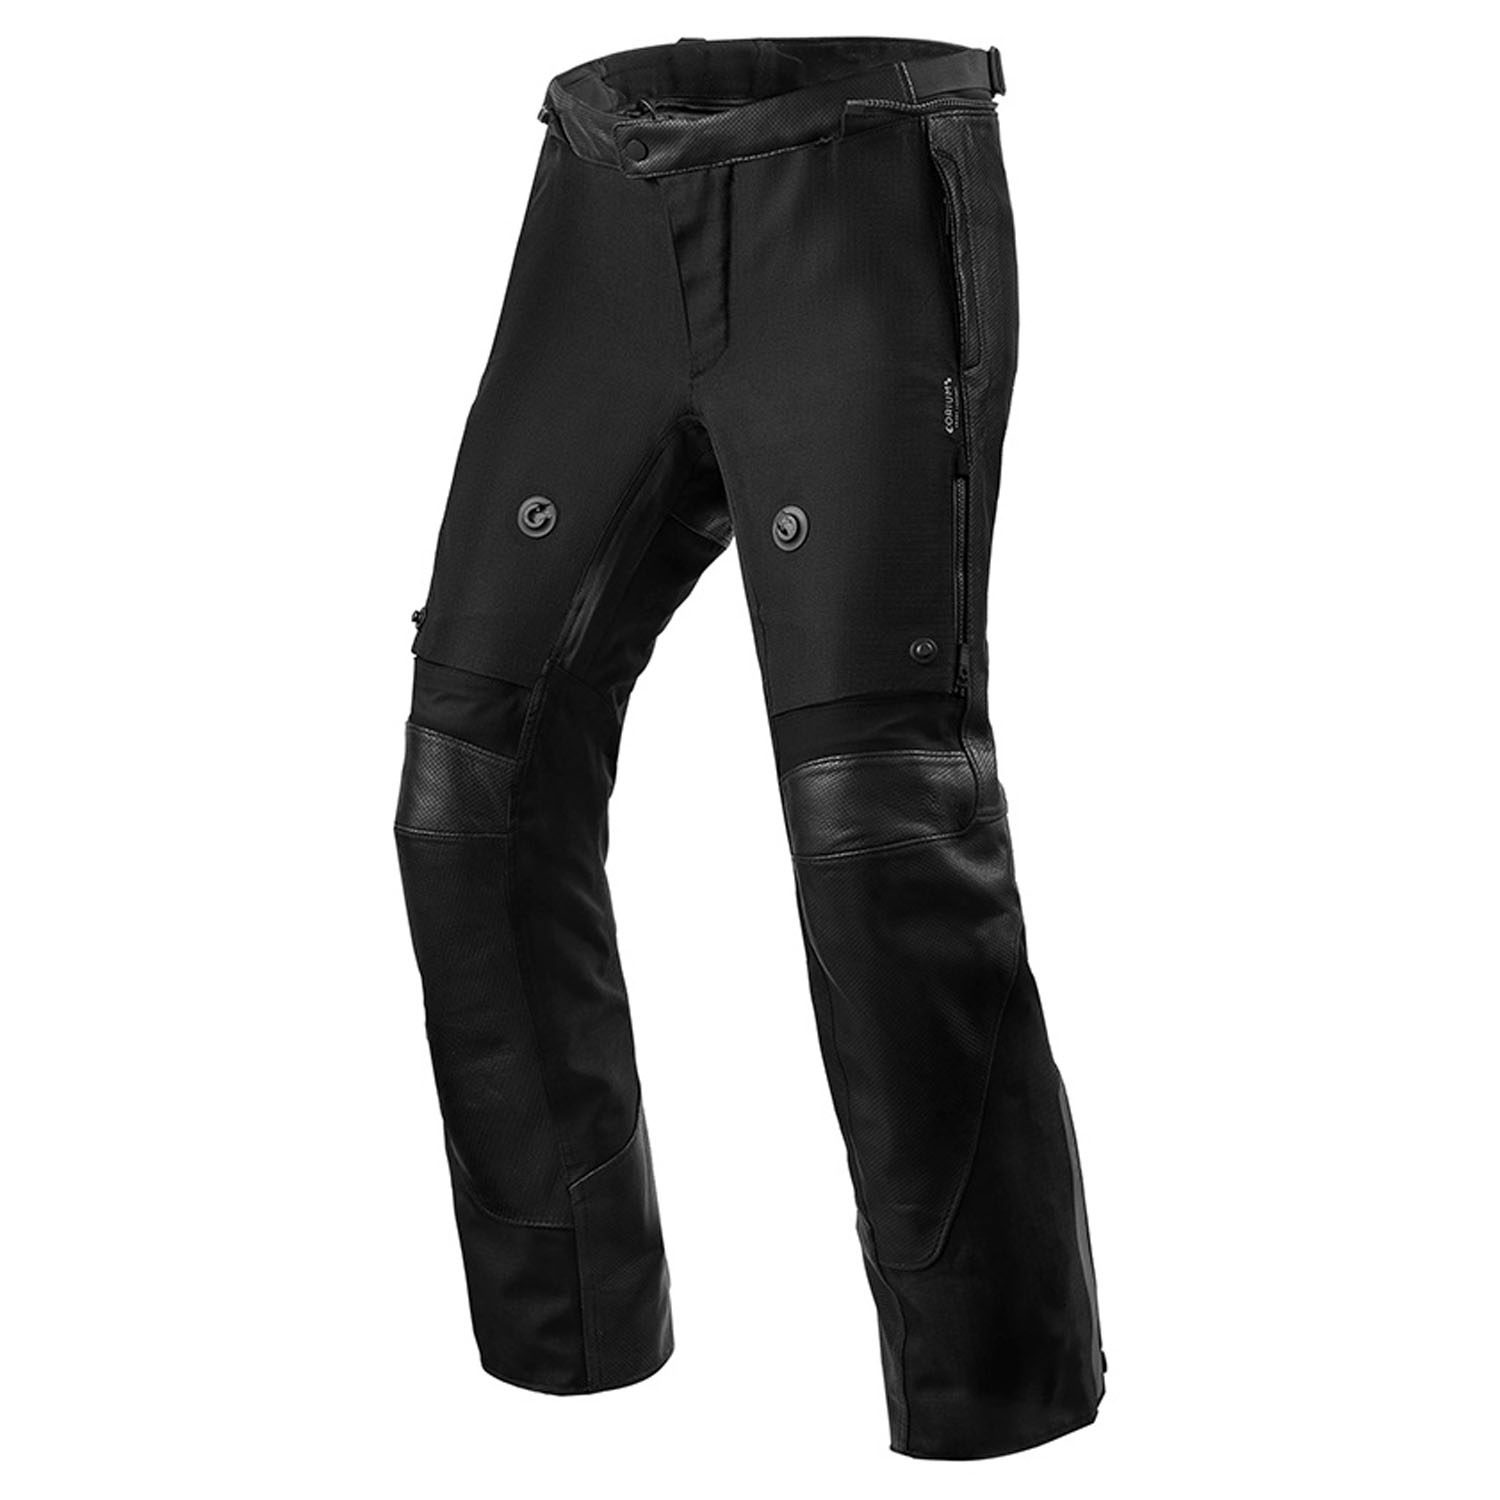 Image of EU REV'IT! Trousers Valve H2O Black Short Motorcycle Pants Taille 56